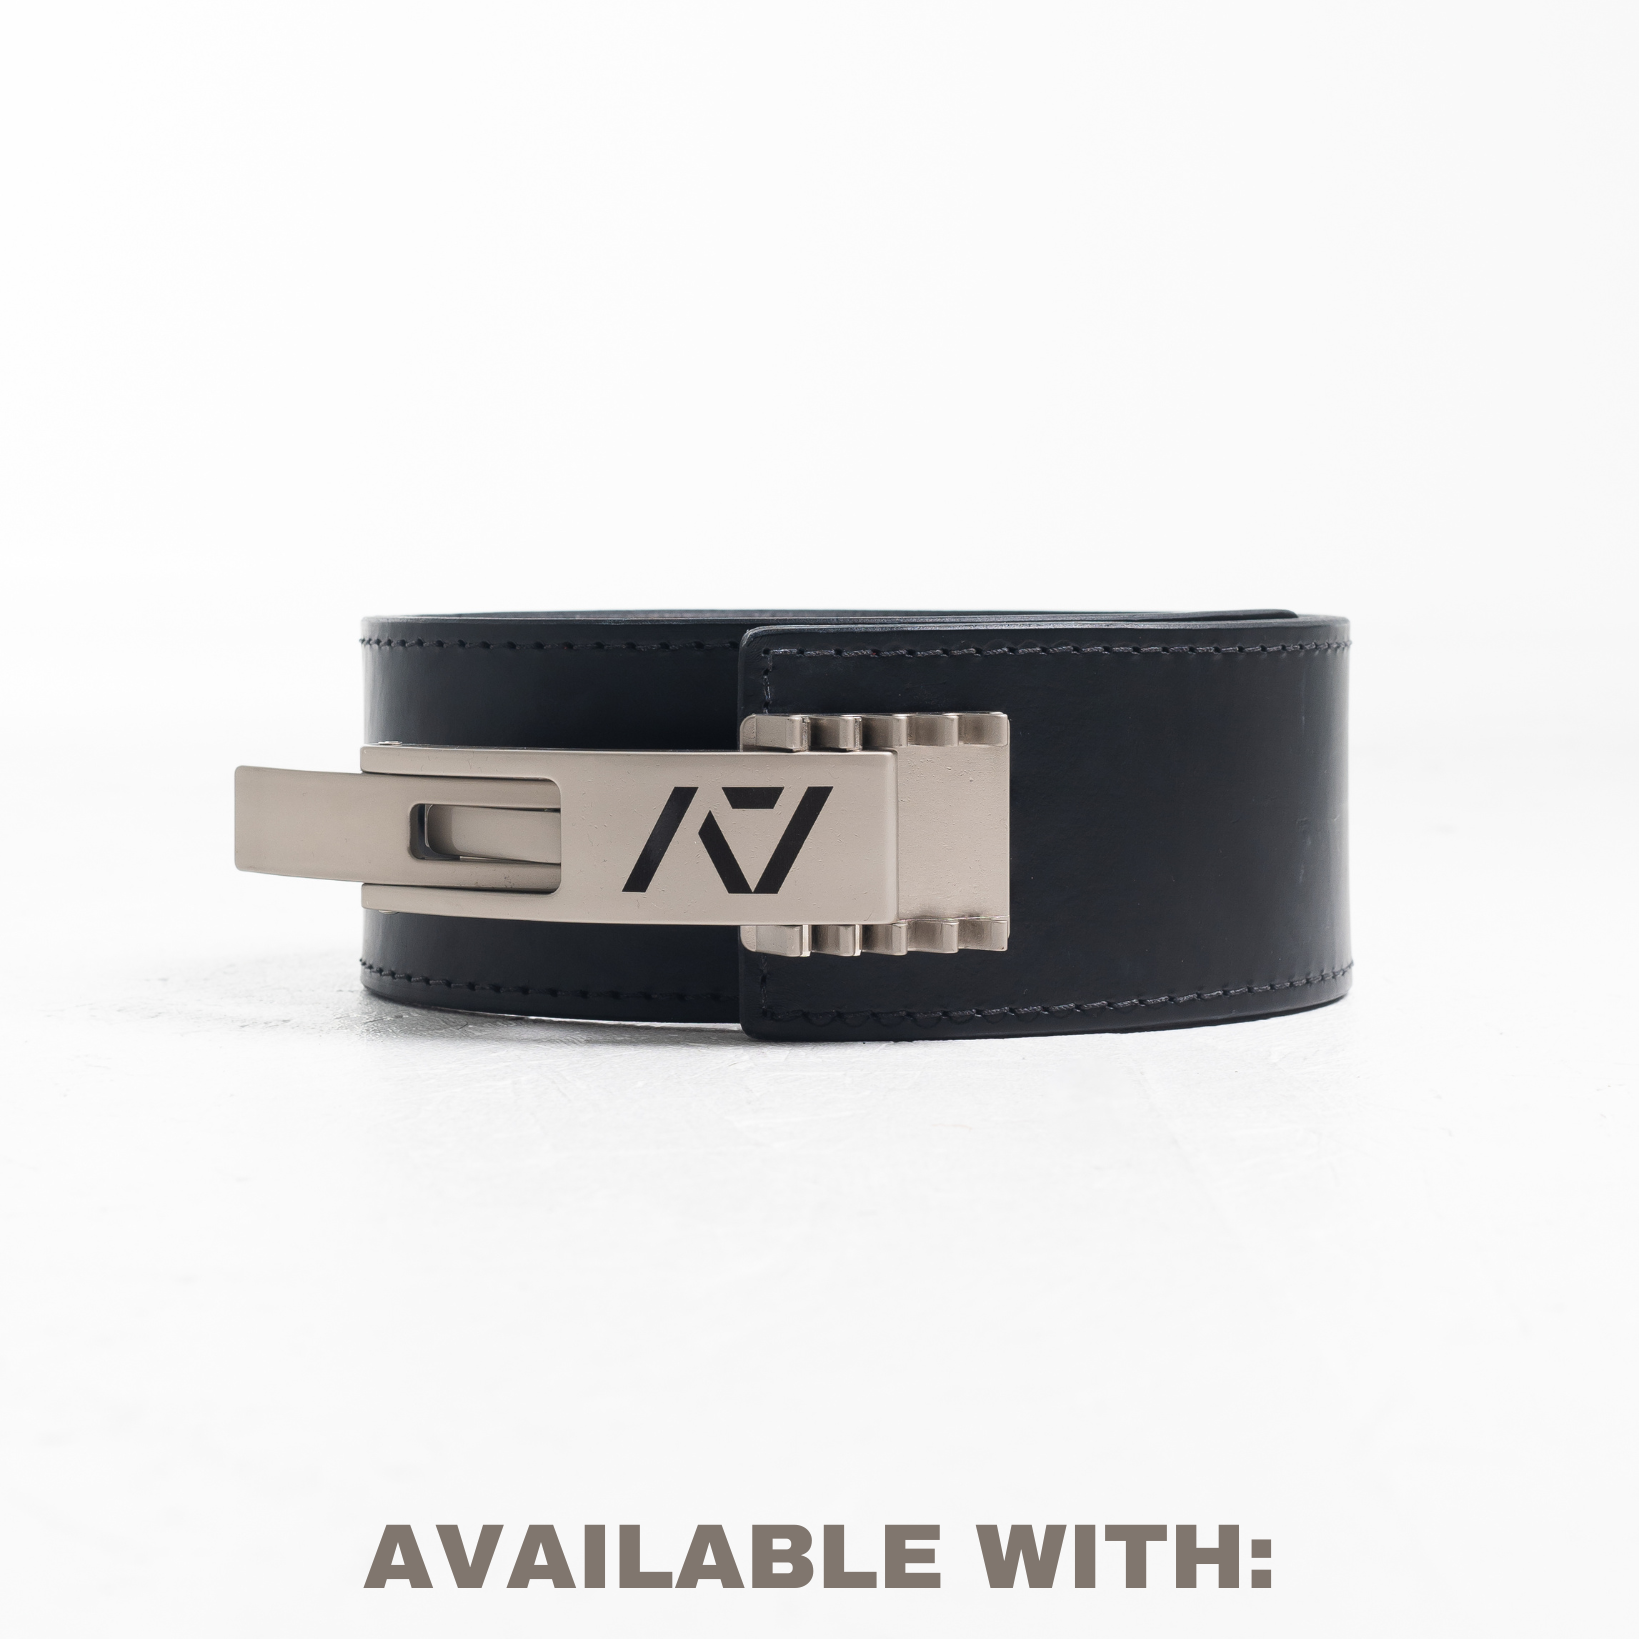 A7 IPF Approved Lever Belt features a black design with black leather, silver engraved buckle and debossed A7 logo on the leather. The new Pioneer Adjustable Lever, PAL, buckle allows you to quickly adjust the tightness of your belt for a perfect fit. The IPF Approved Kit includes Singlet, A7 Meet Shirt, A7 Zebra Wrist Wraps, A7 Deadlift Socks, Hourglass Knee Sleeves (Stiff Knee Sleeves and Rigor Mortis Knee Sleeves). Genouillères powerlifting shipping to France, Spain, Ireland, Germany, Italy and EU.